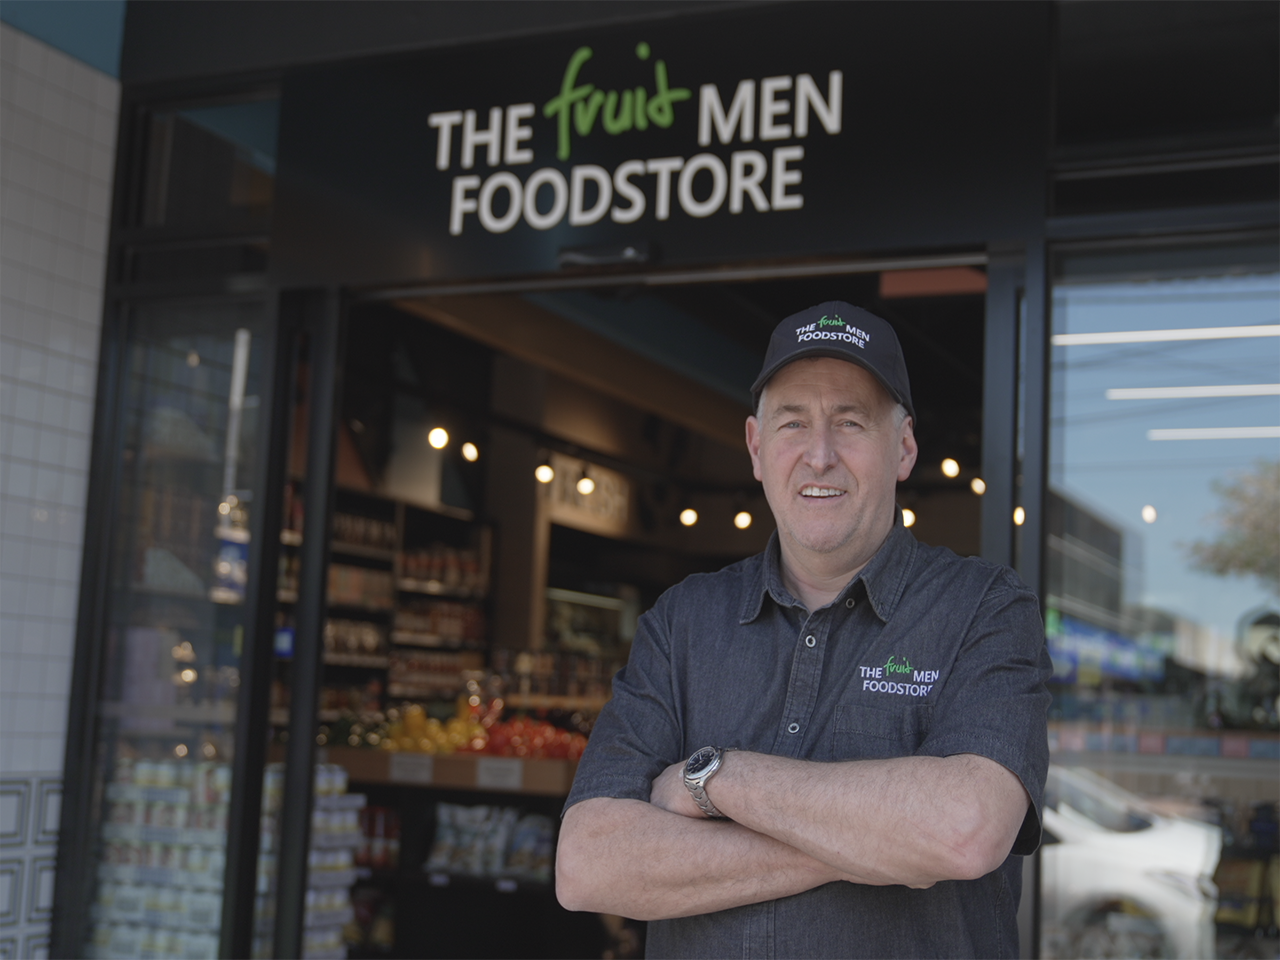 The owner of the Fruit Men Food Store standing in front of his business.